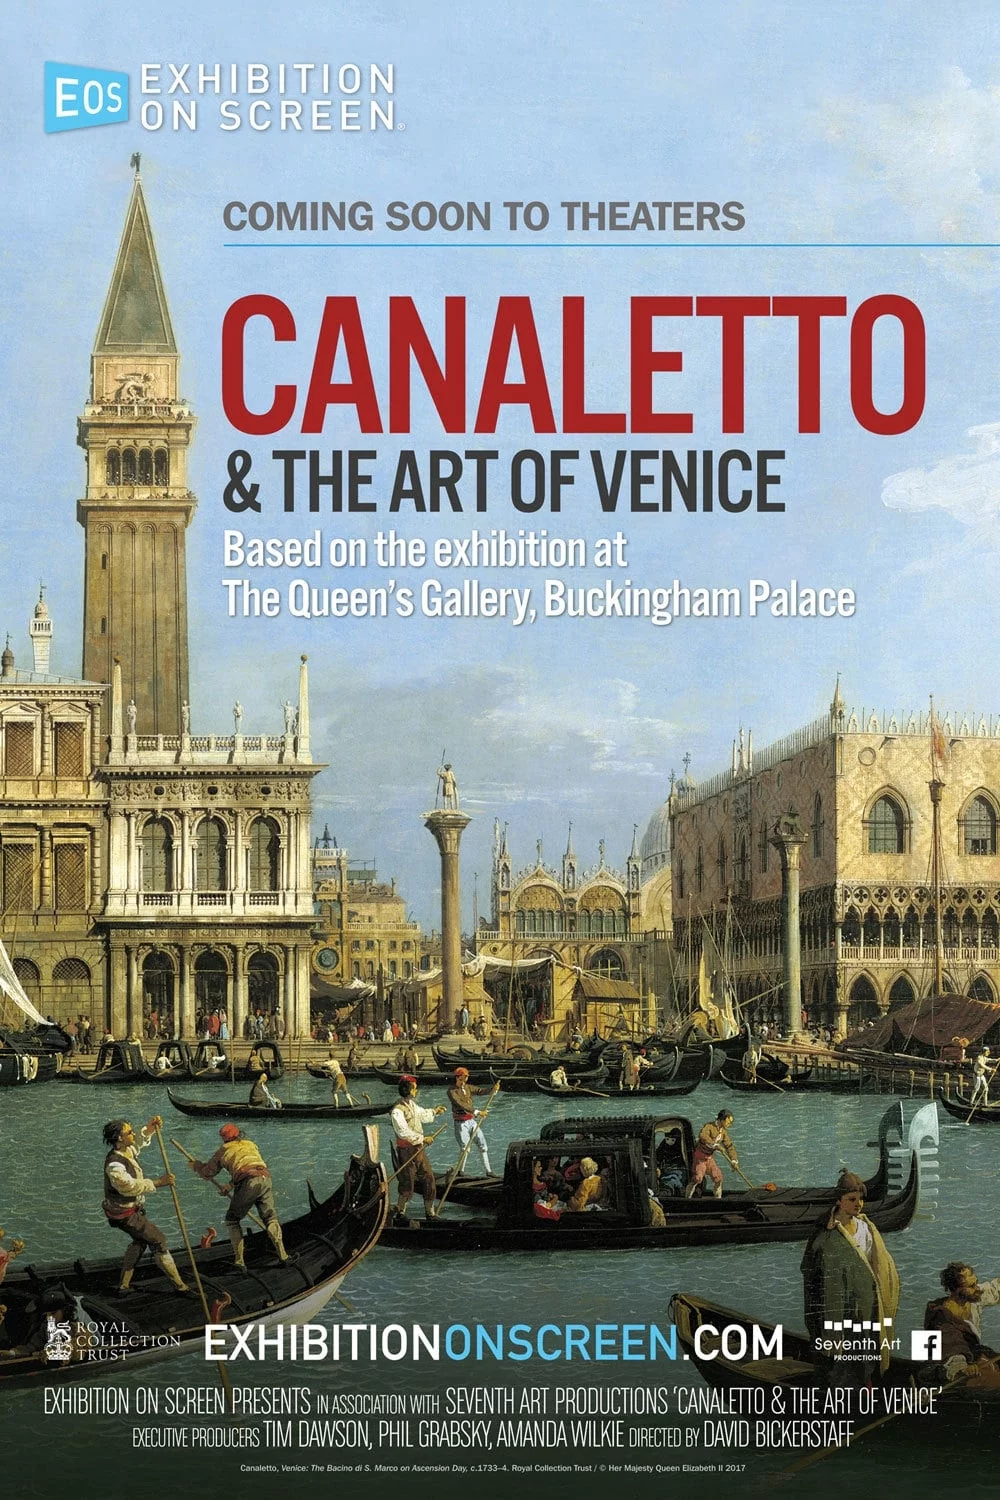 Photo du film : Canaletto & the Art of Venice